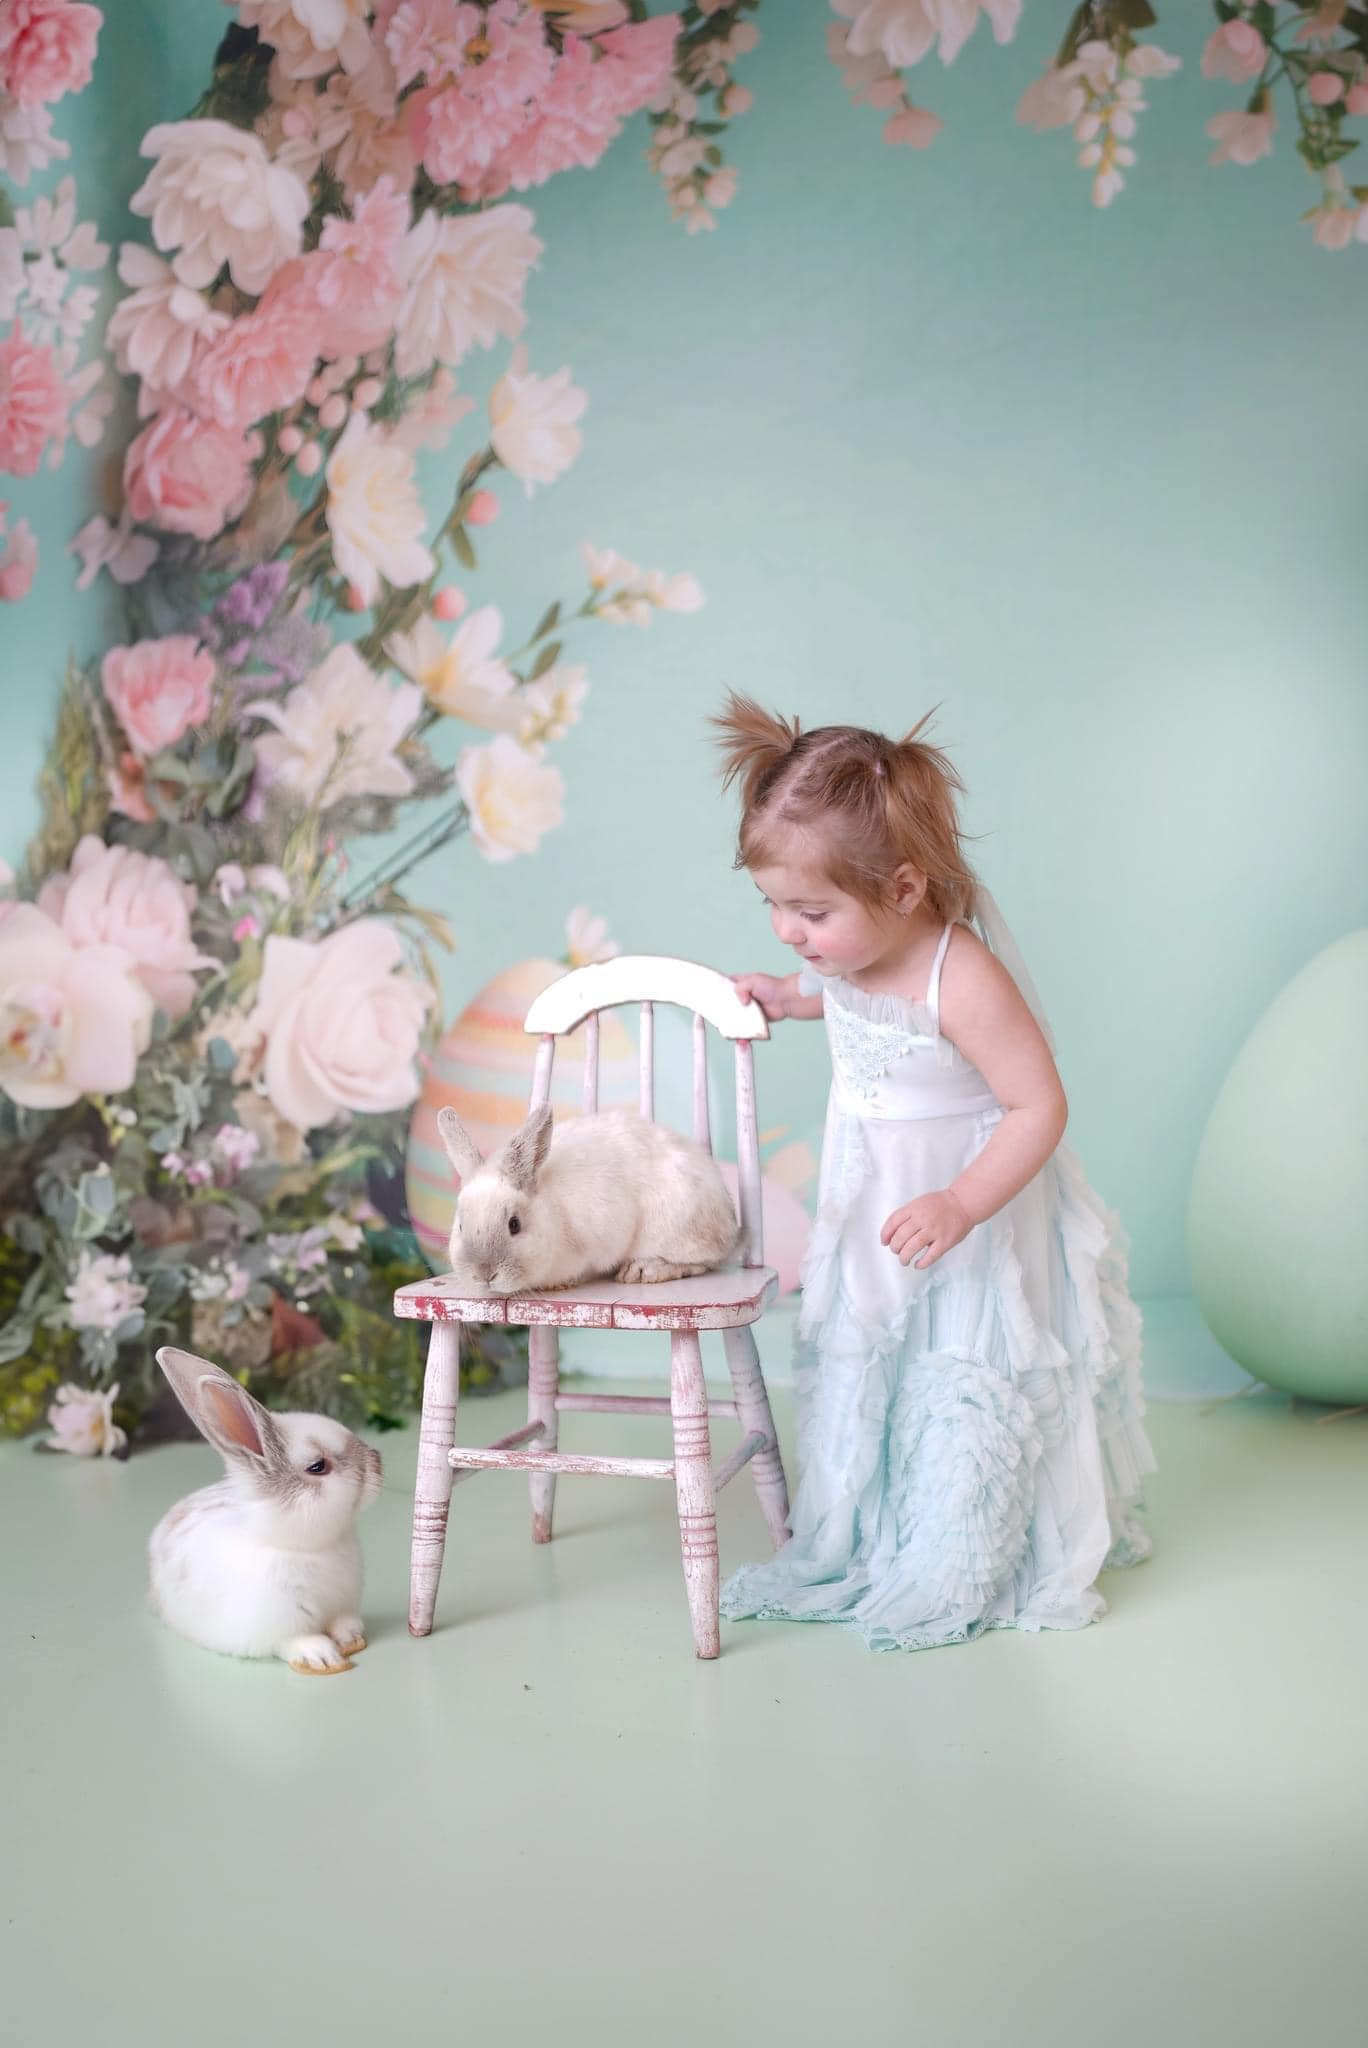 Kate Green Easter Backdrop with Flowers Designed by Patty Roberts